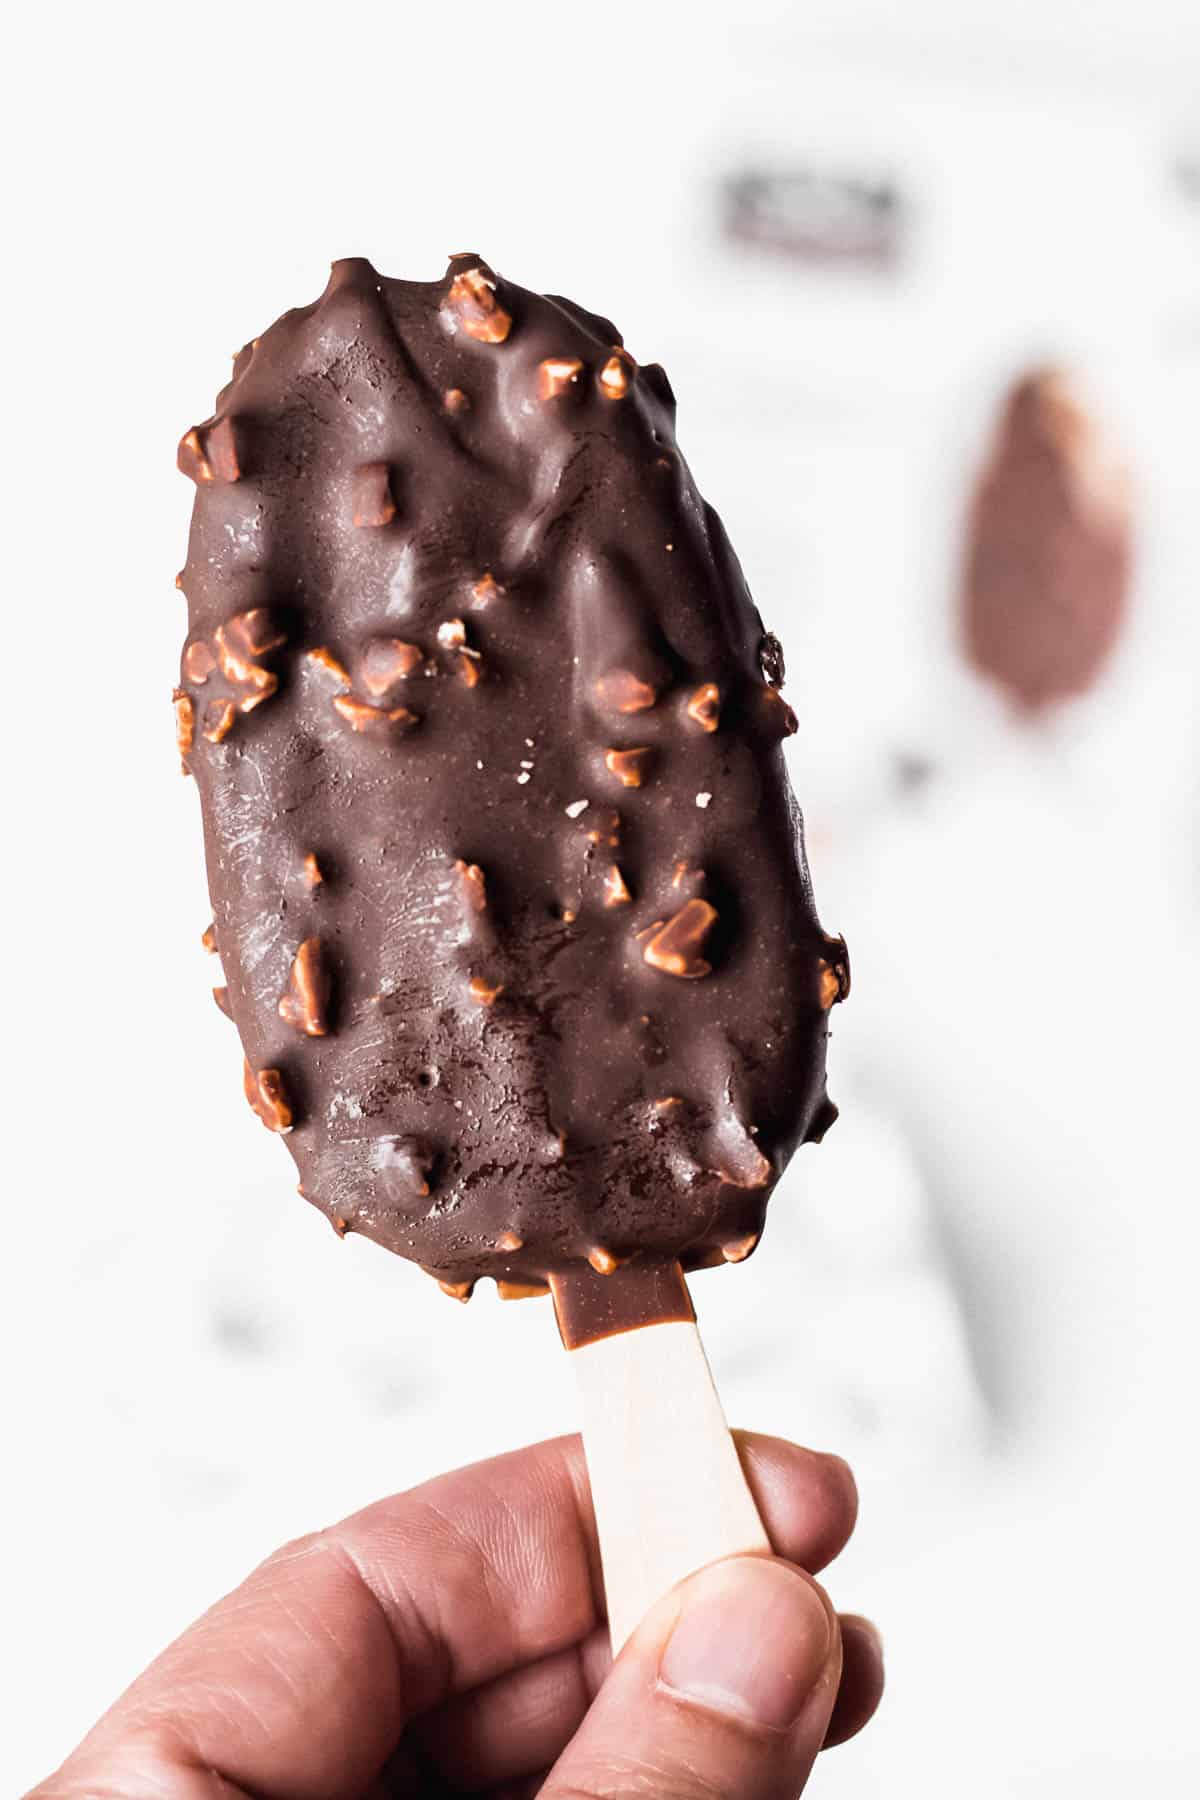 An ice cream bar on a stick being held up in 